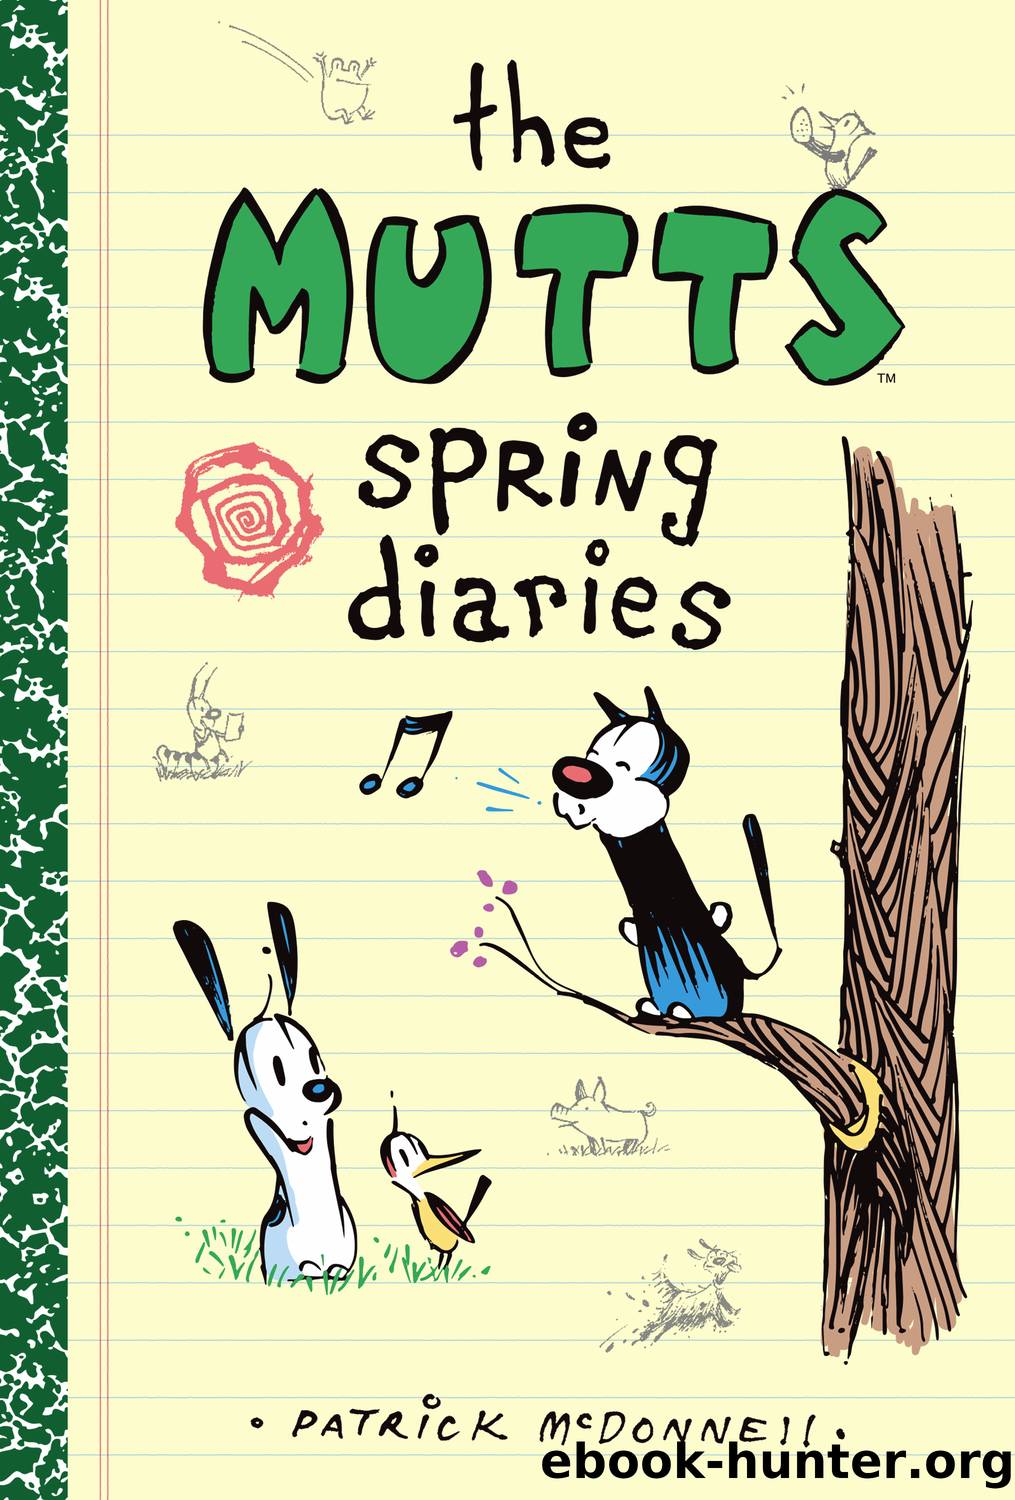 The Mutts Spring Diaries by Patrick McDonnell